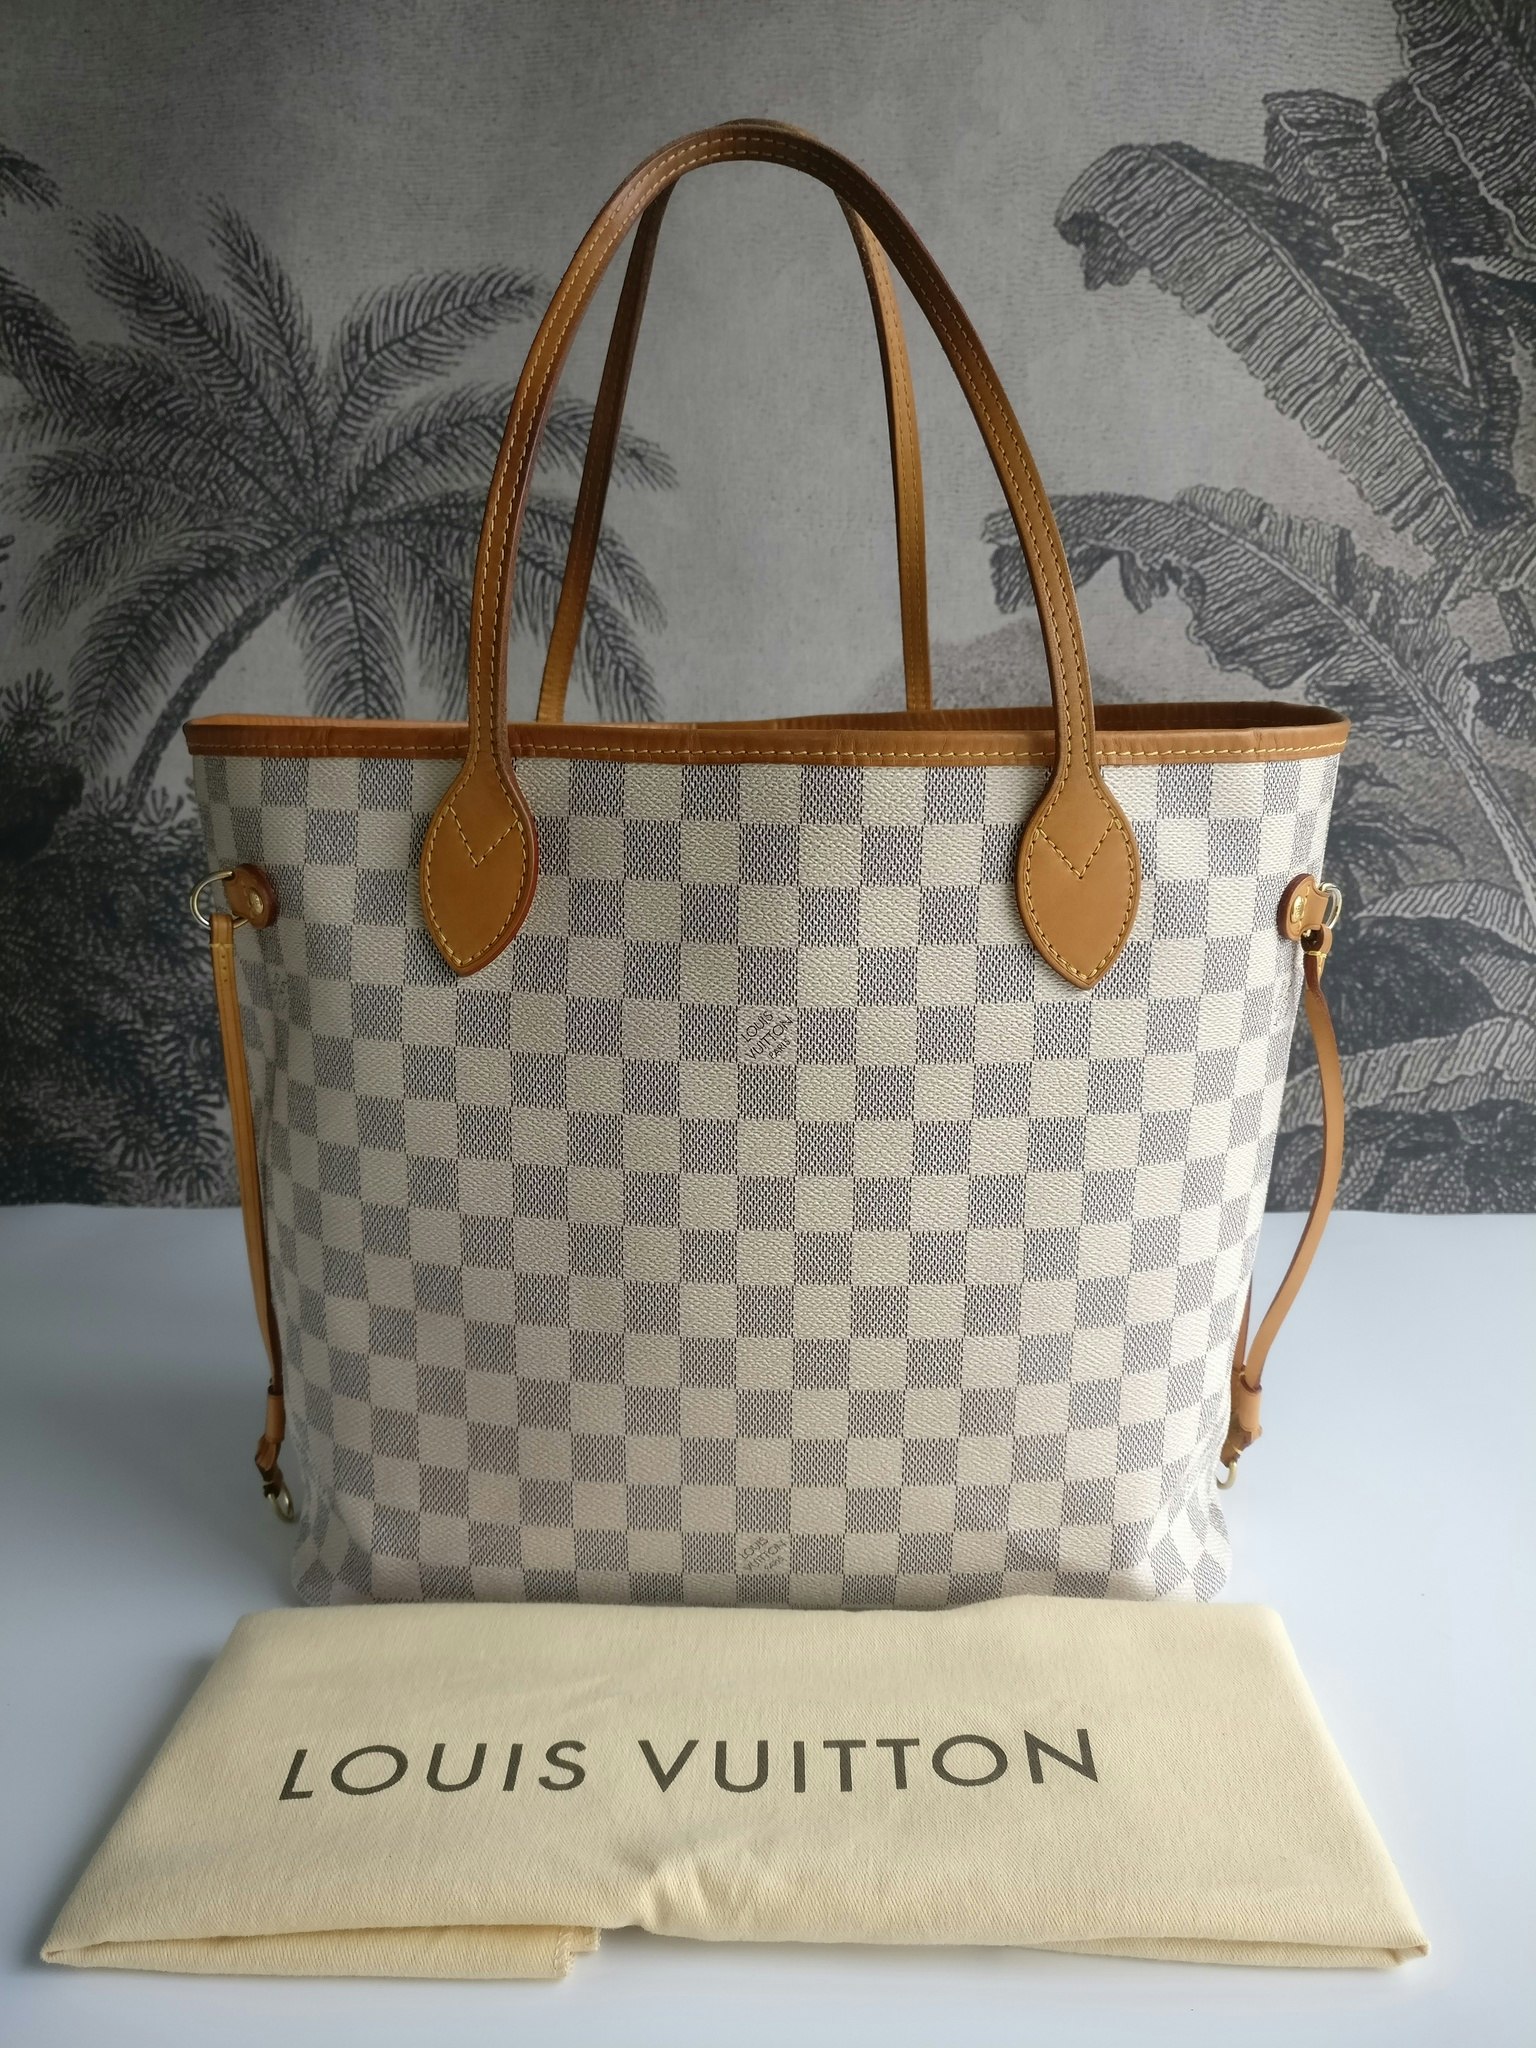 Louis Vuitton Neverfull MM Tote in Damier Azur, Mint Condition